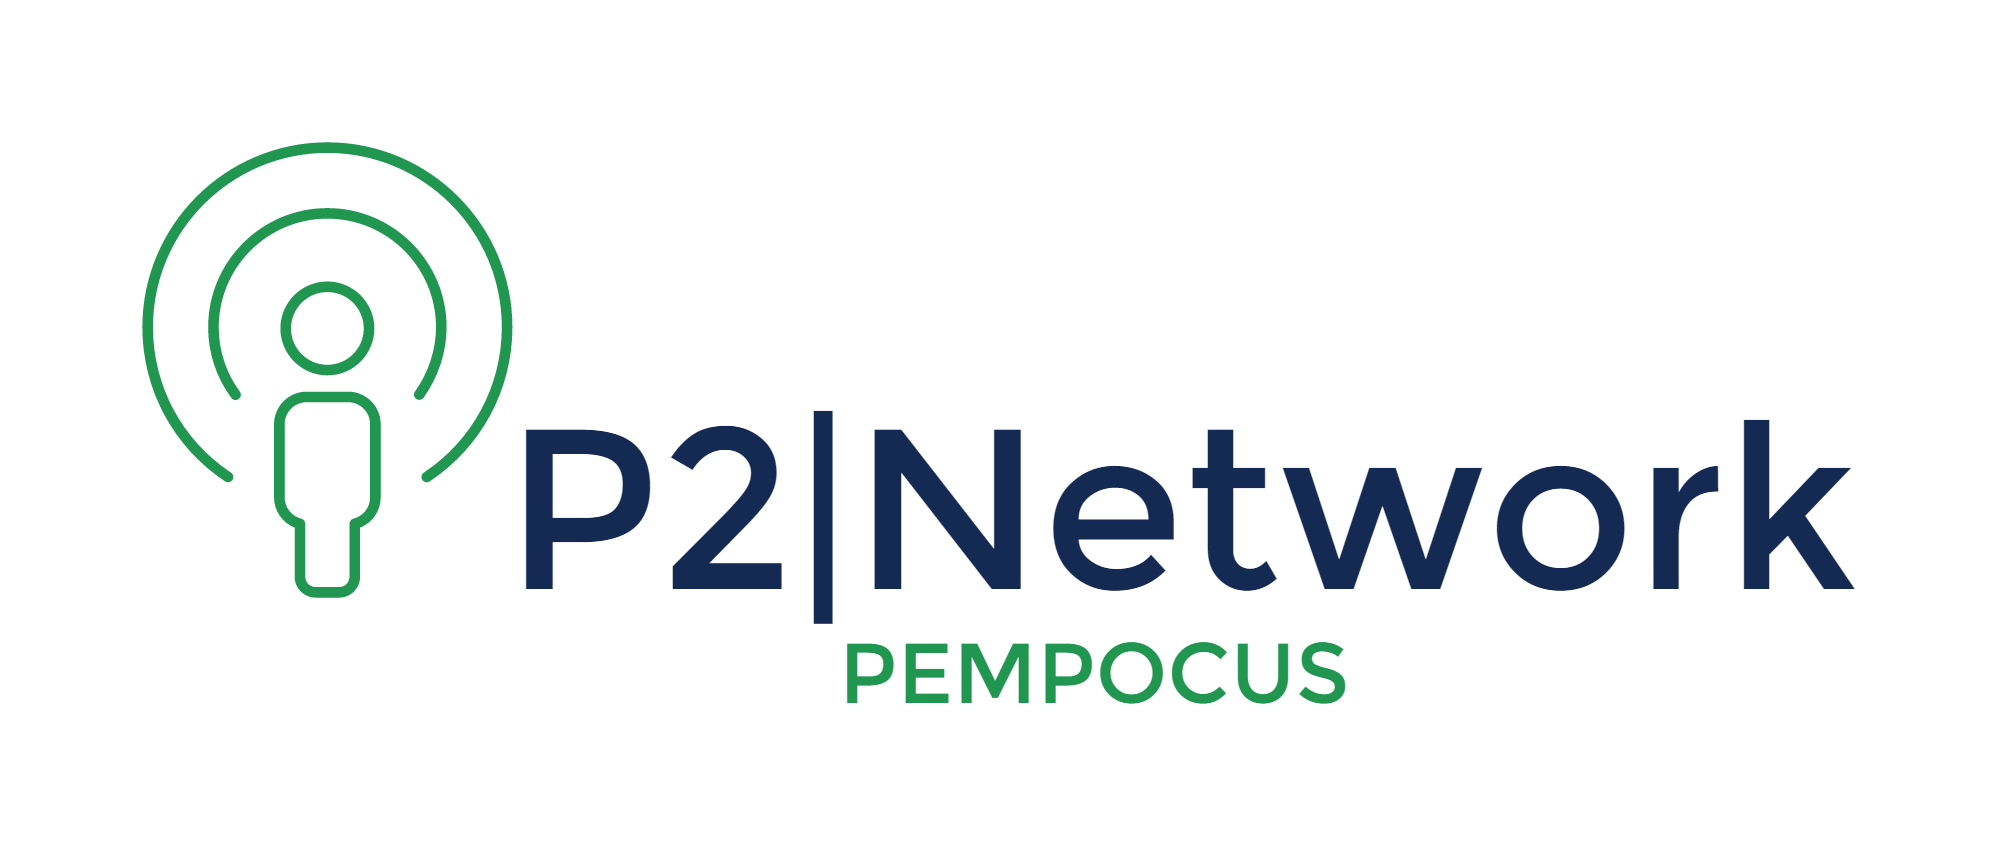 Welcome to the new P2Network.com